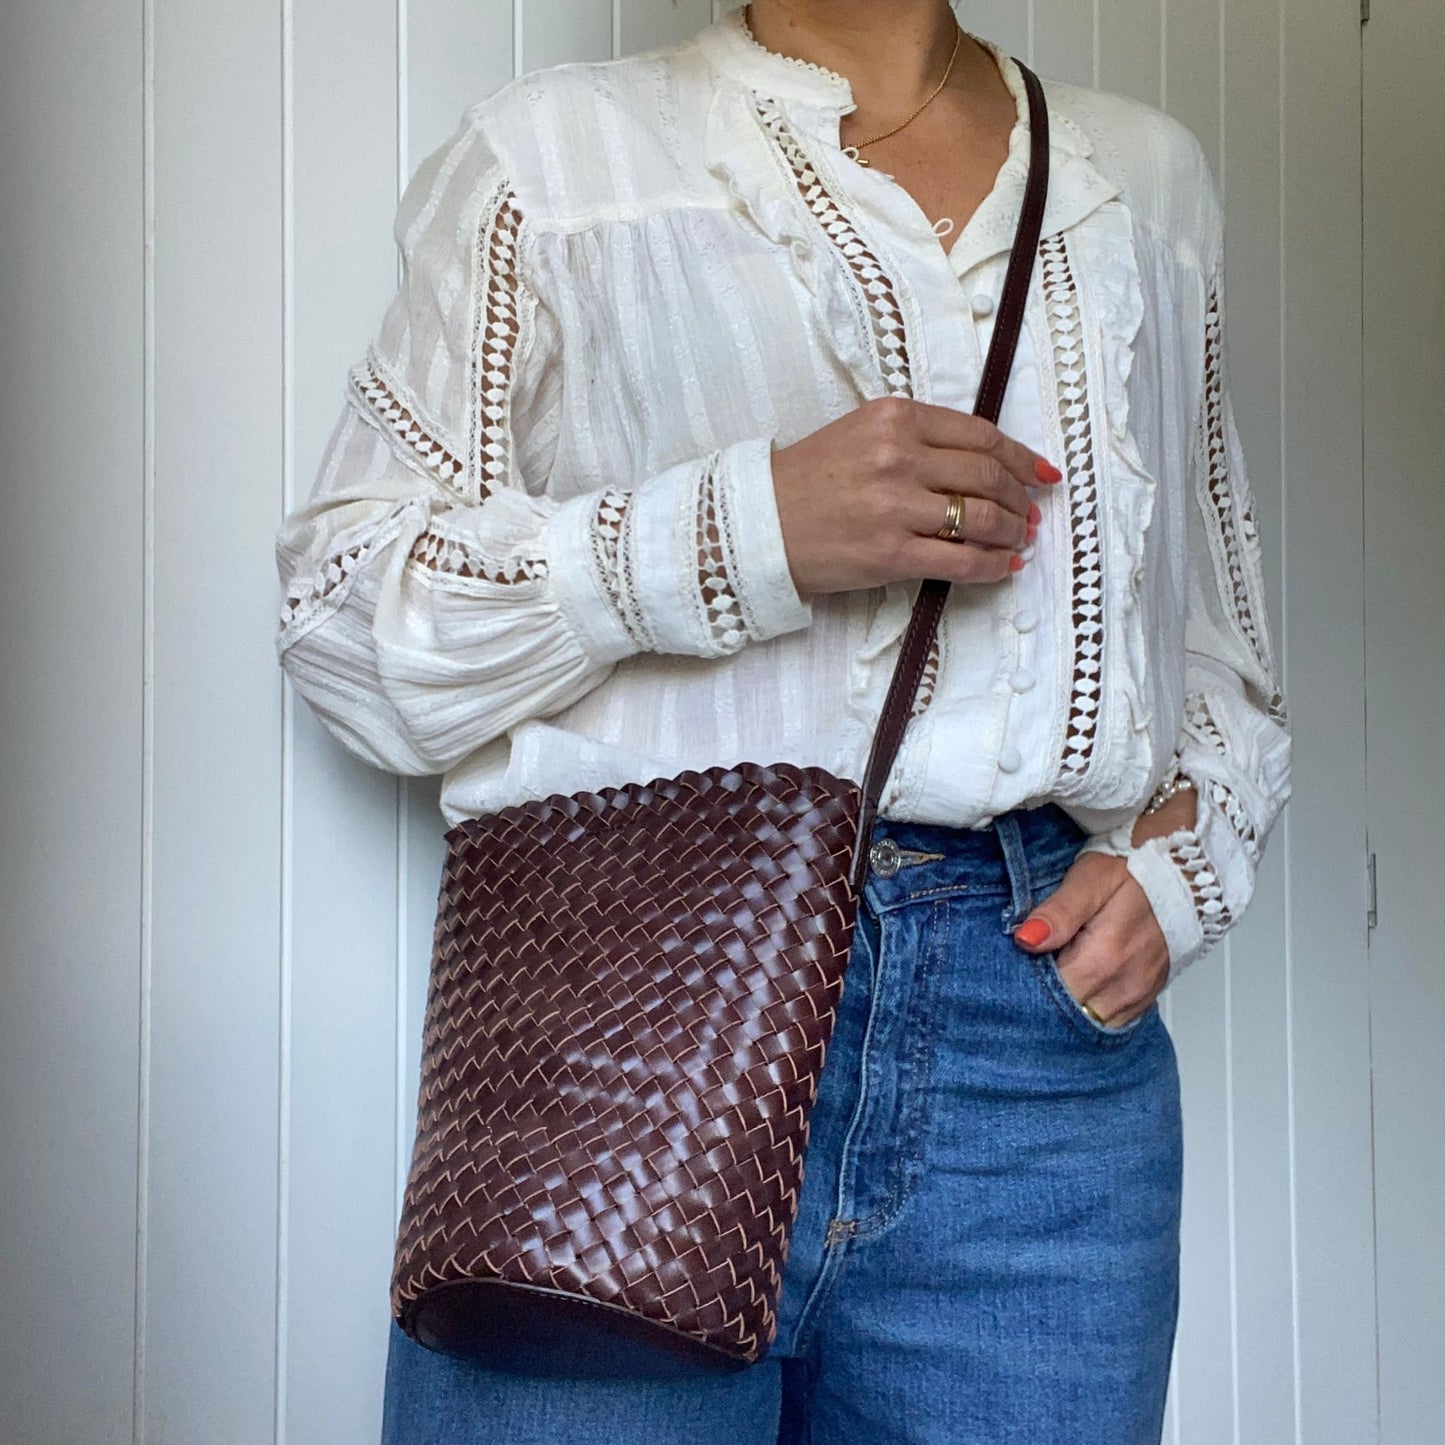 The Woven Leather Bucket Bag